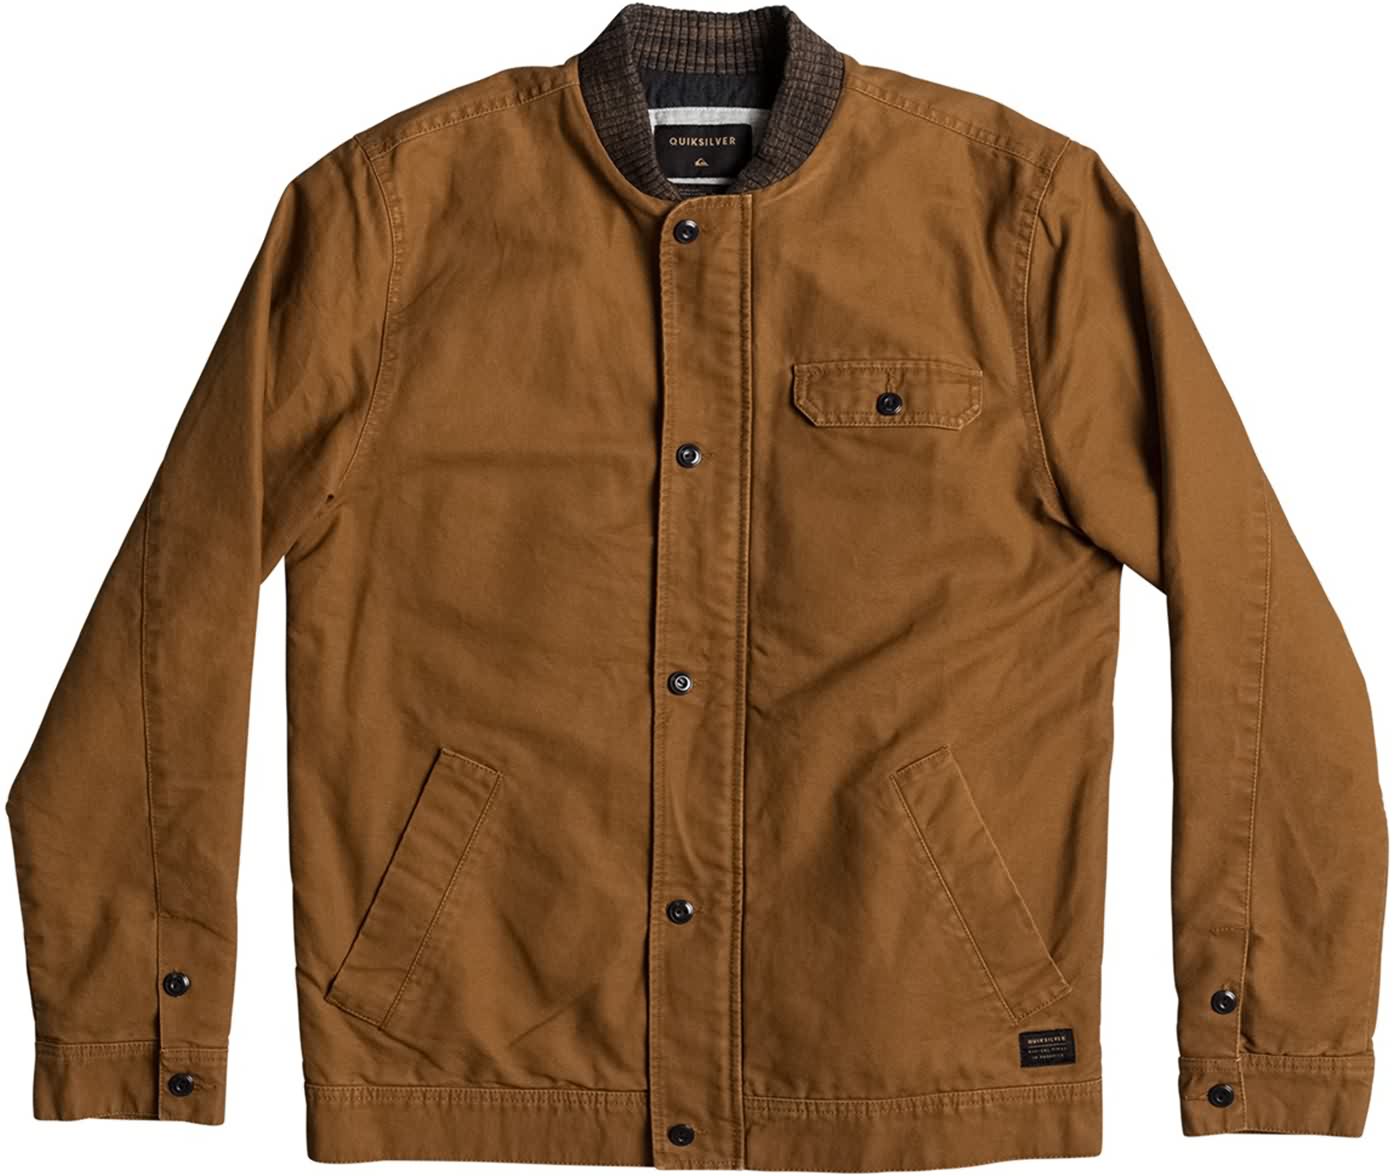 Quiksilver Surf Fall 2017 Mens Jackets & Outerwear Preview